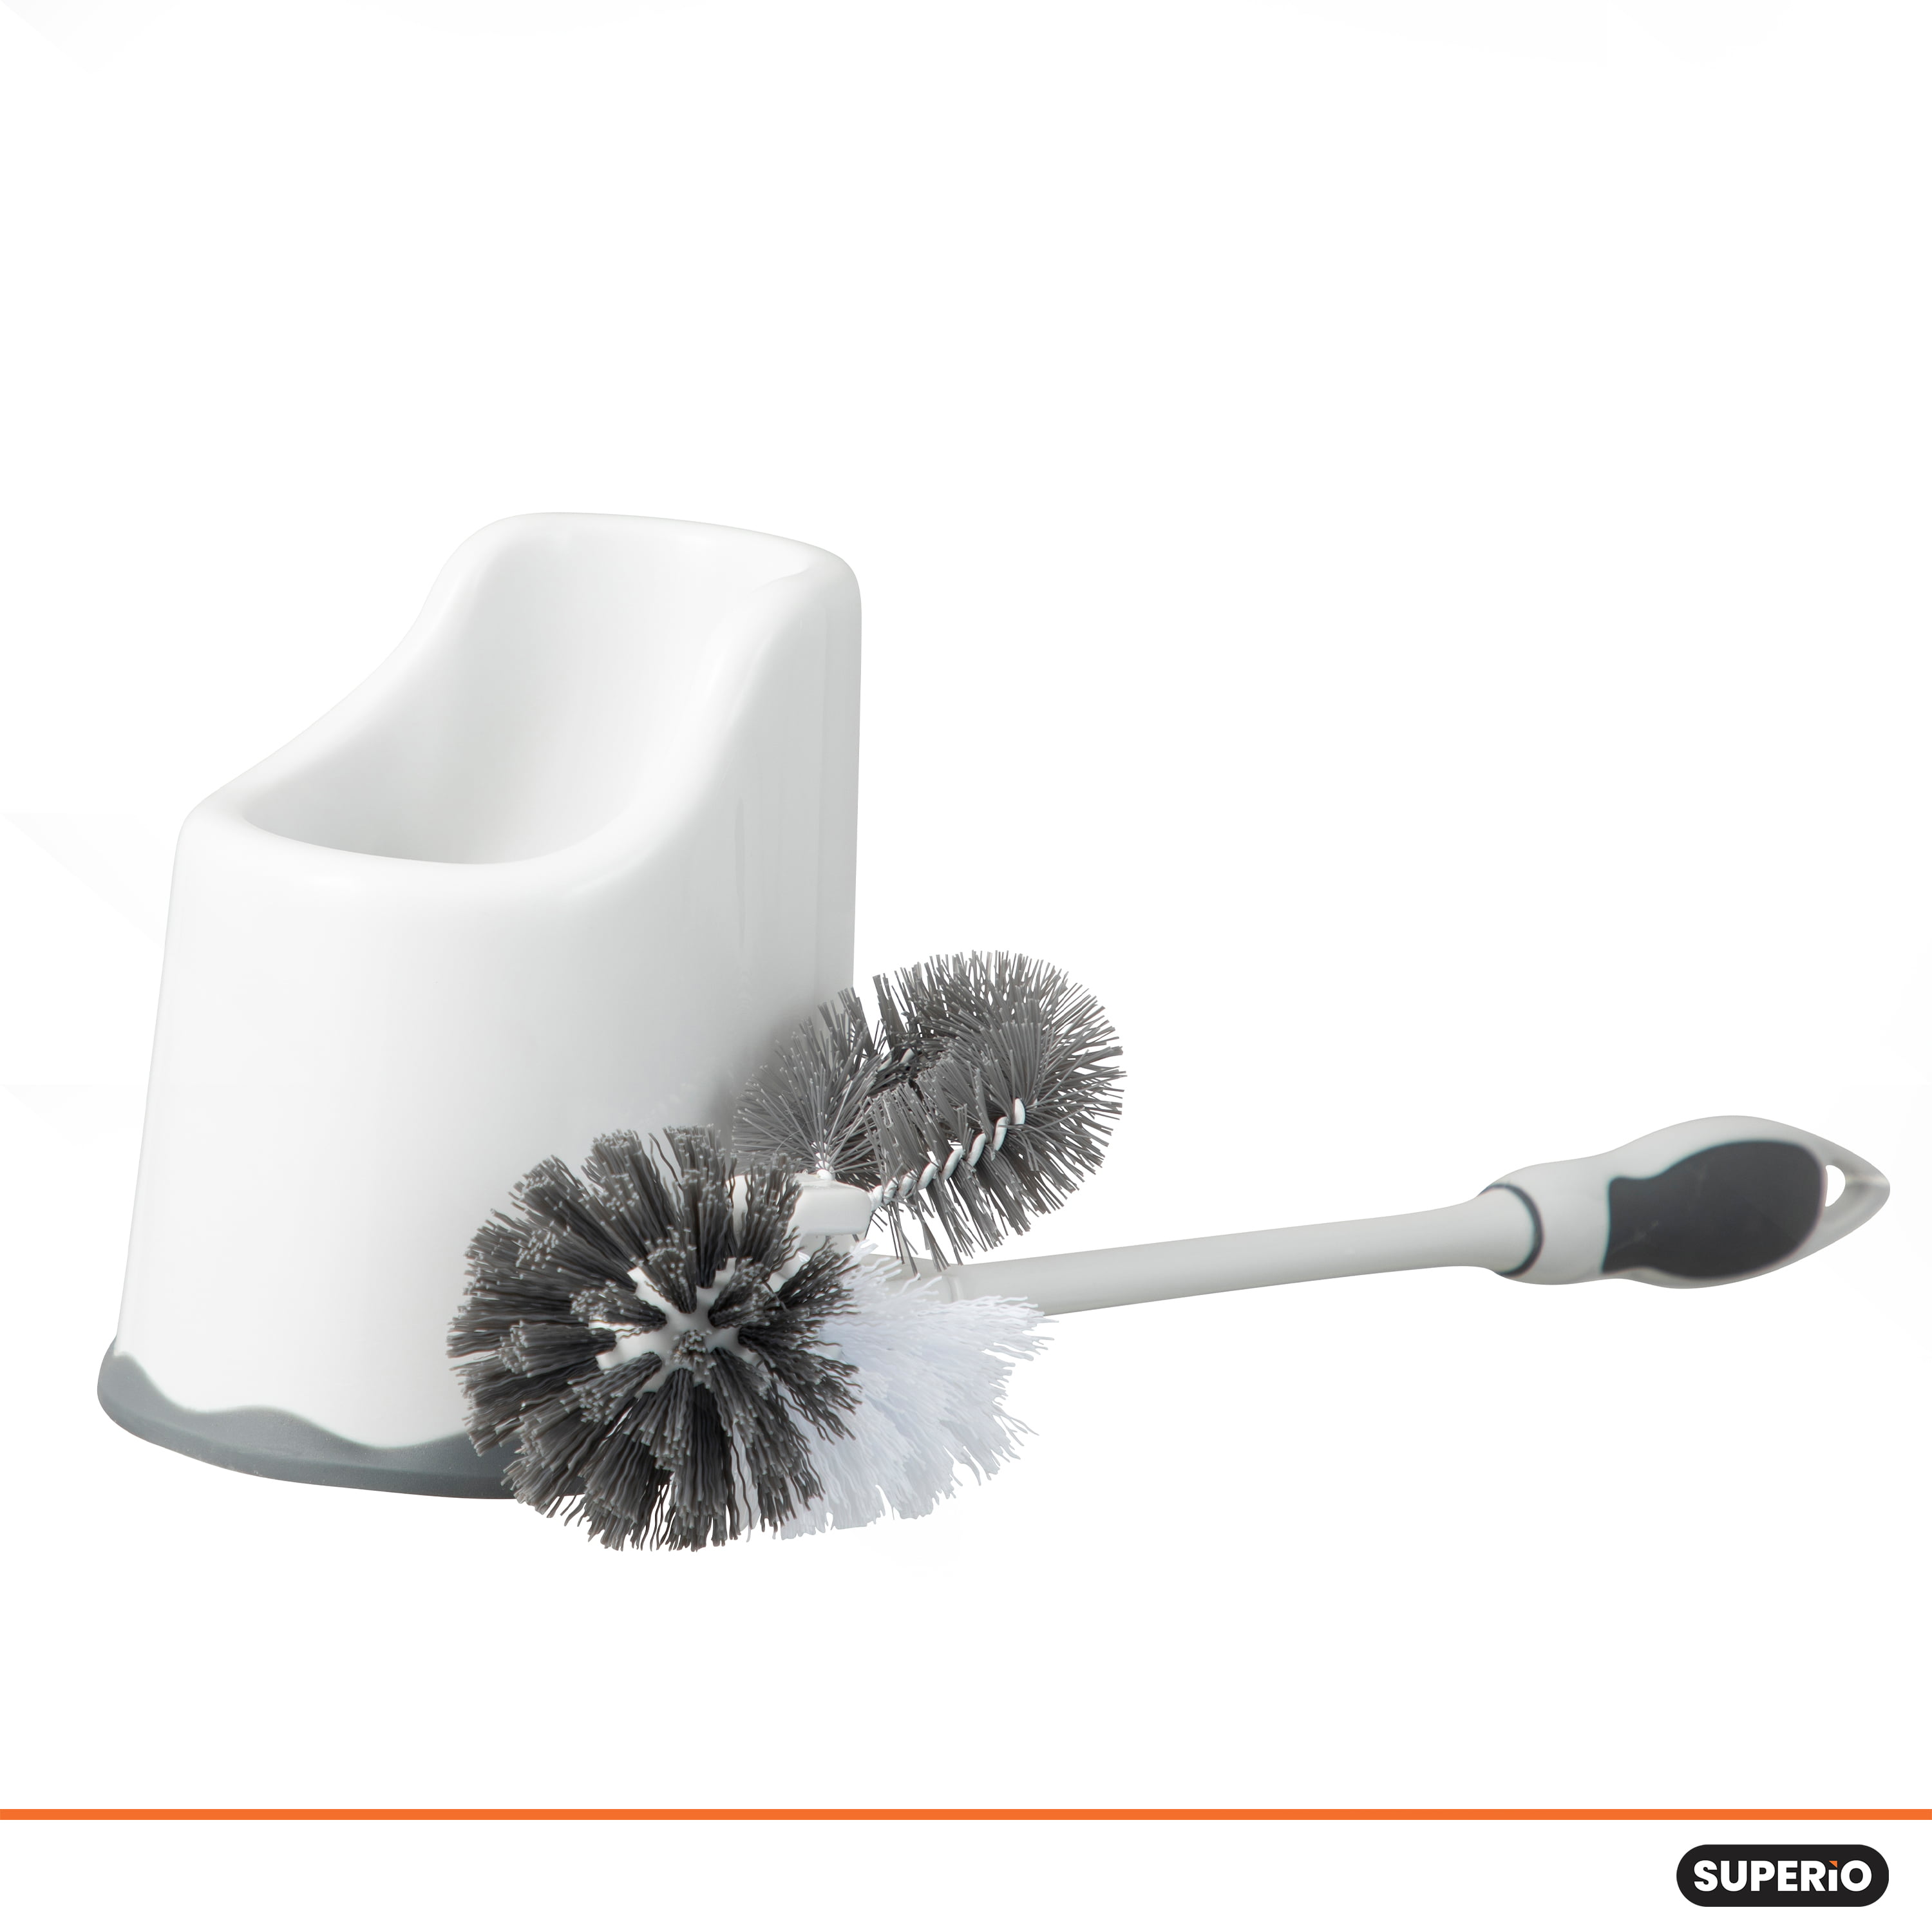 Dependable Industries Toilet Bowl Brush with Rim Cleaner and Holder Set -  Toilet Bowl Cleaning System with Scrubbing Wand, Under Rim Lip Brush and